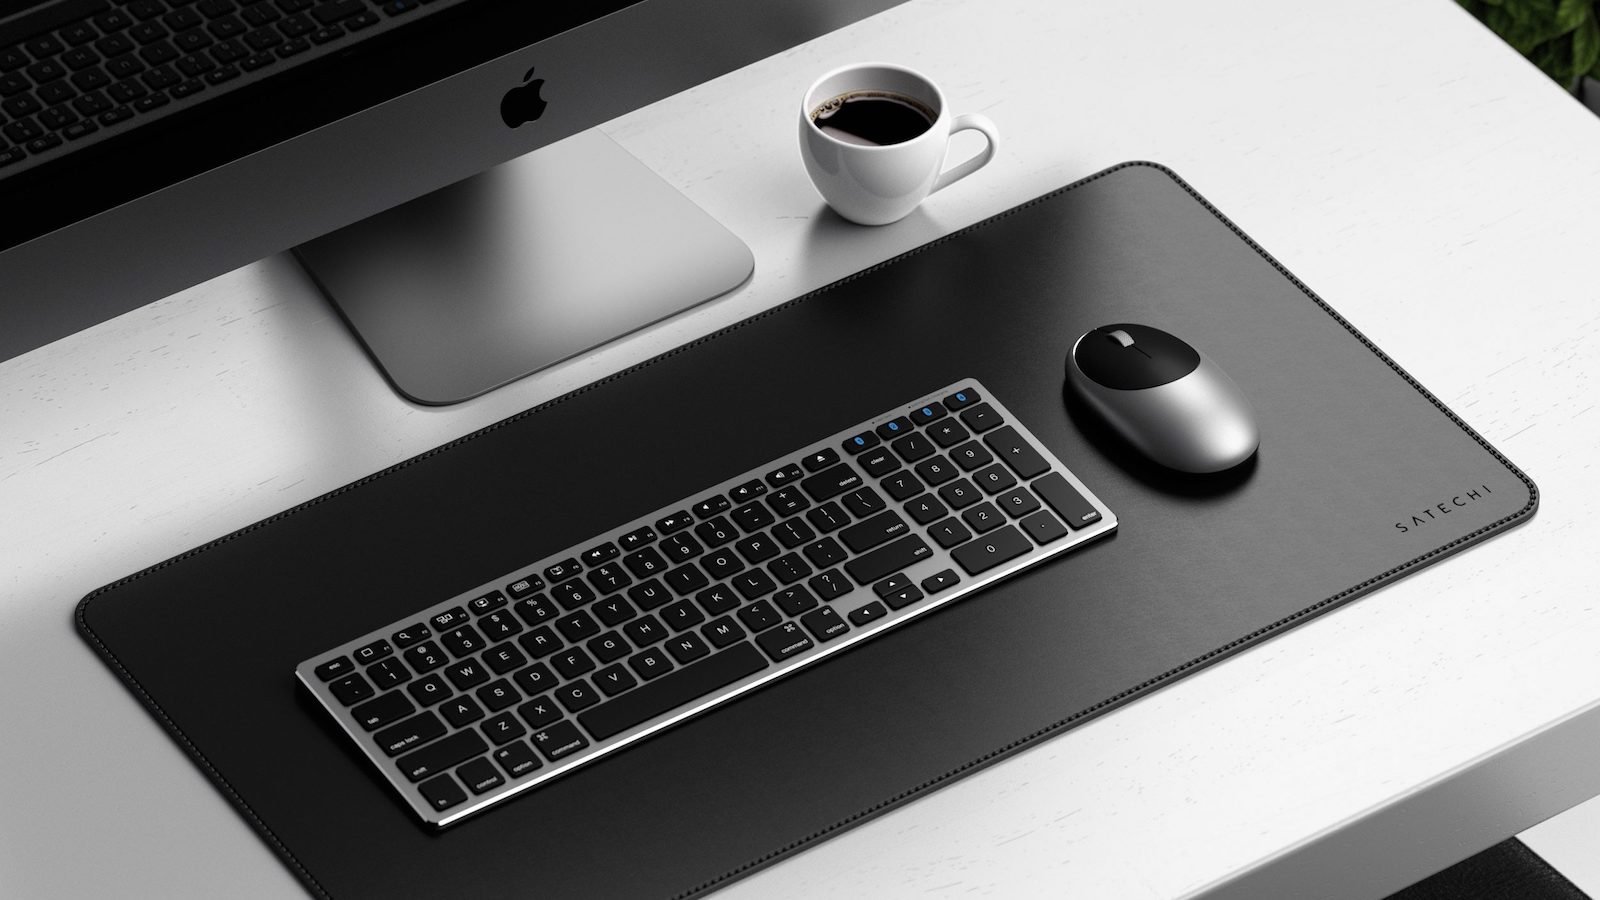 Satechi M1 wireless mouse for Mac features optical sensors and a 32-foot Bluetooth range